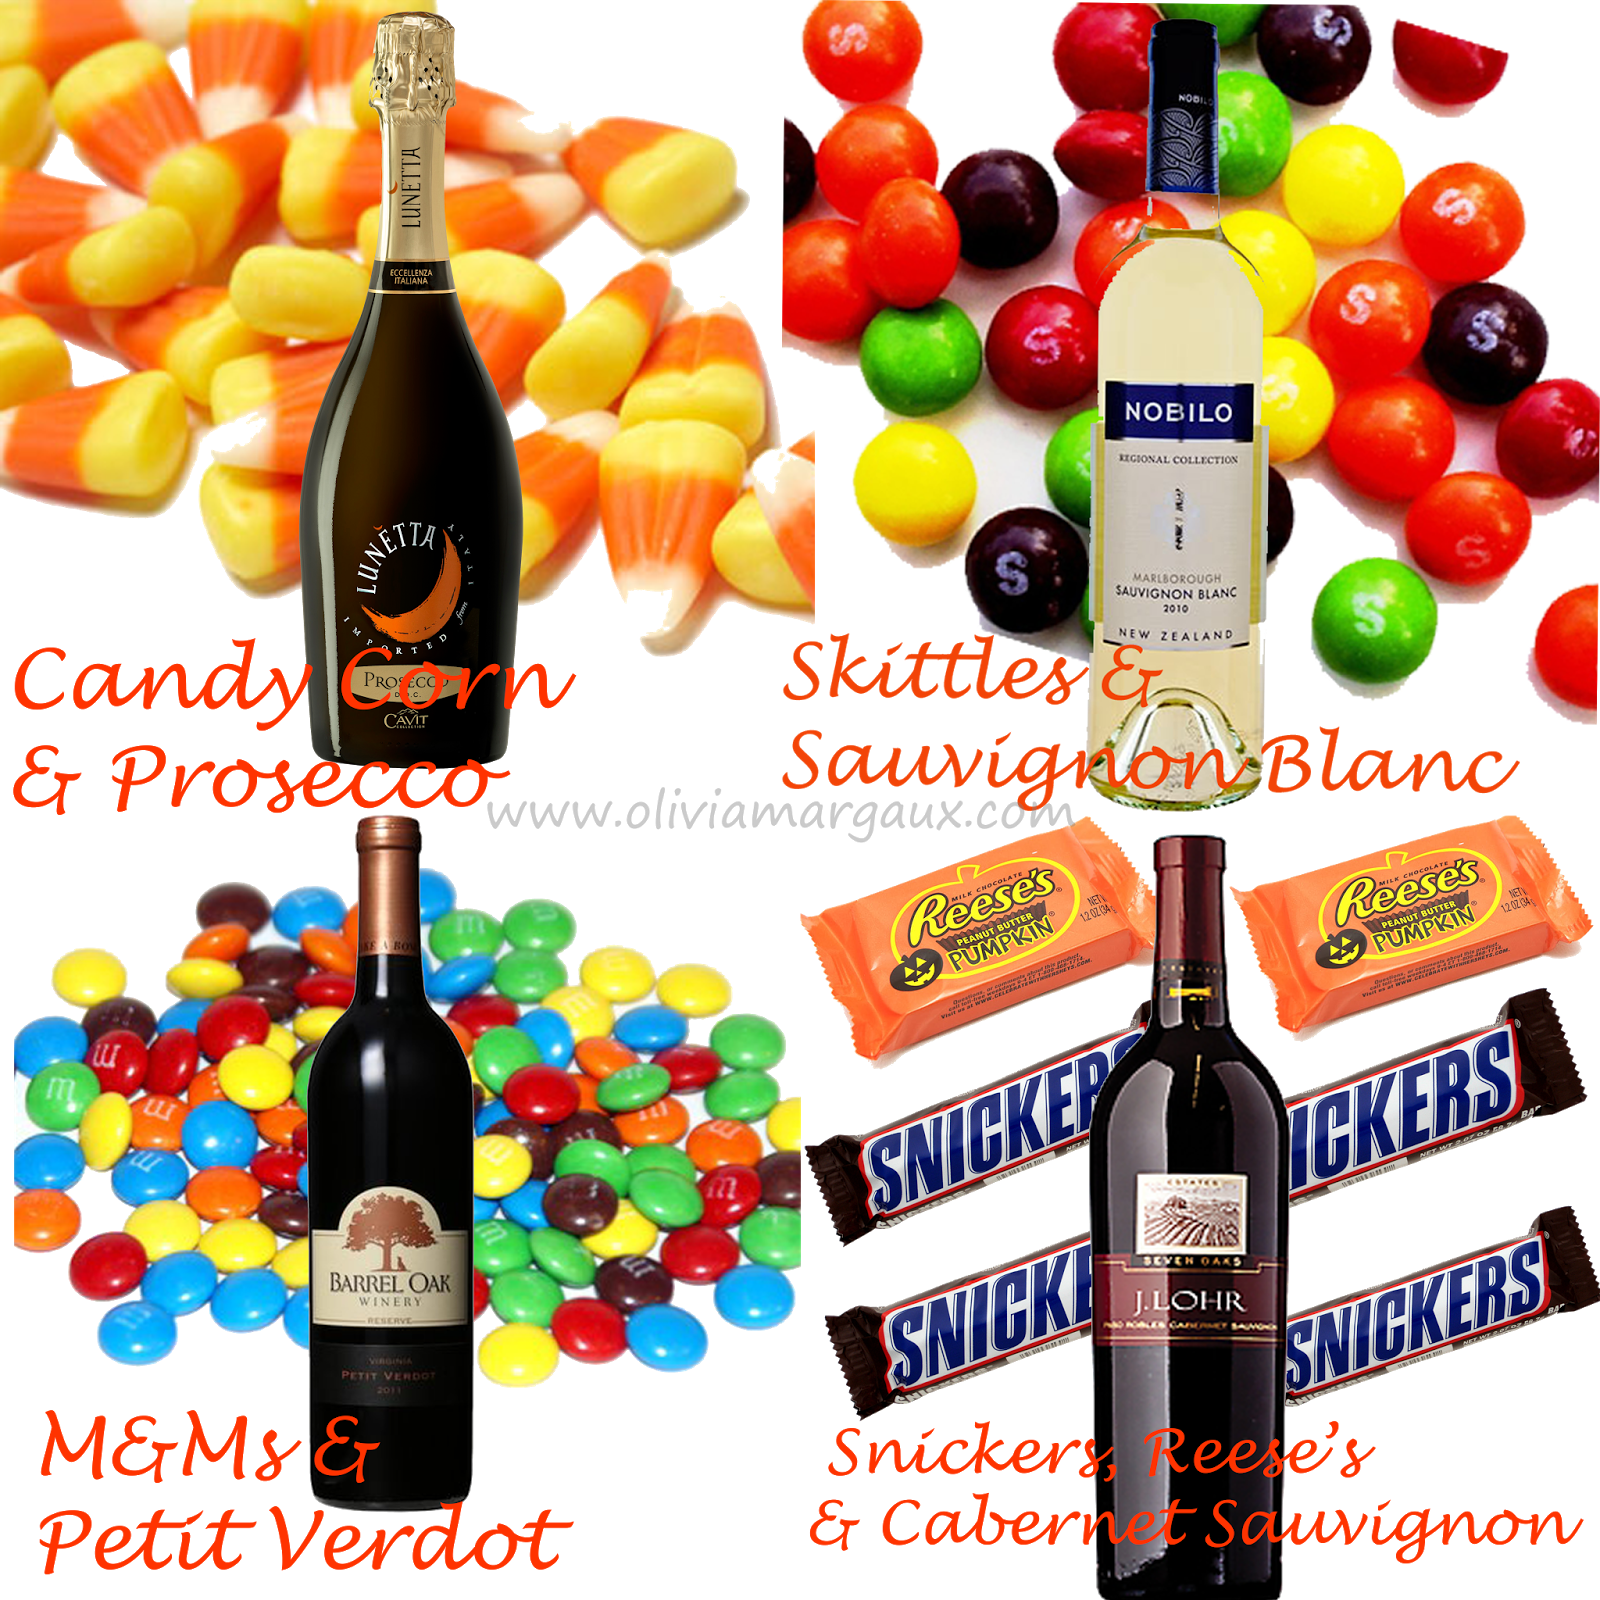 Lunetta Prosecco With Candy Corn - Snickers Candy Bar (1600x1600)